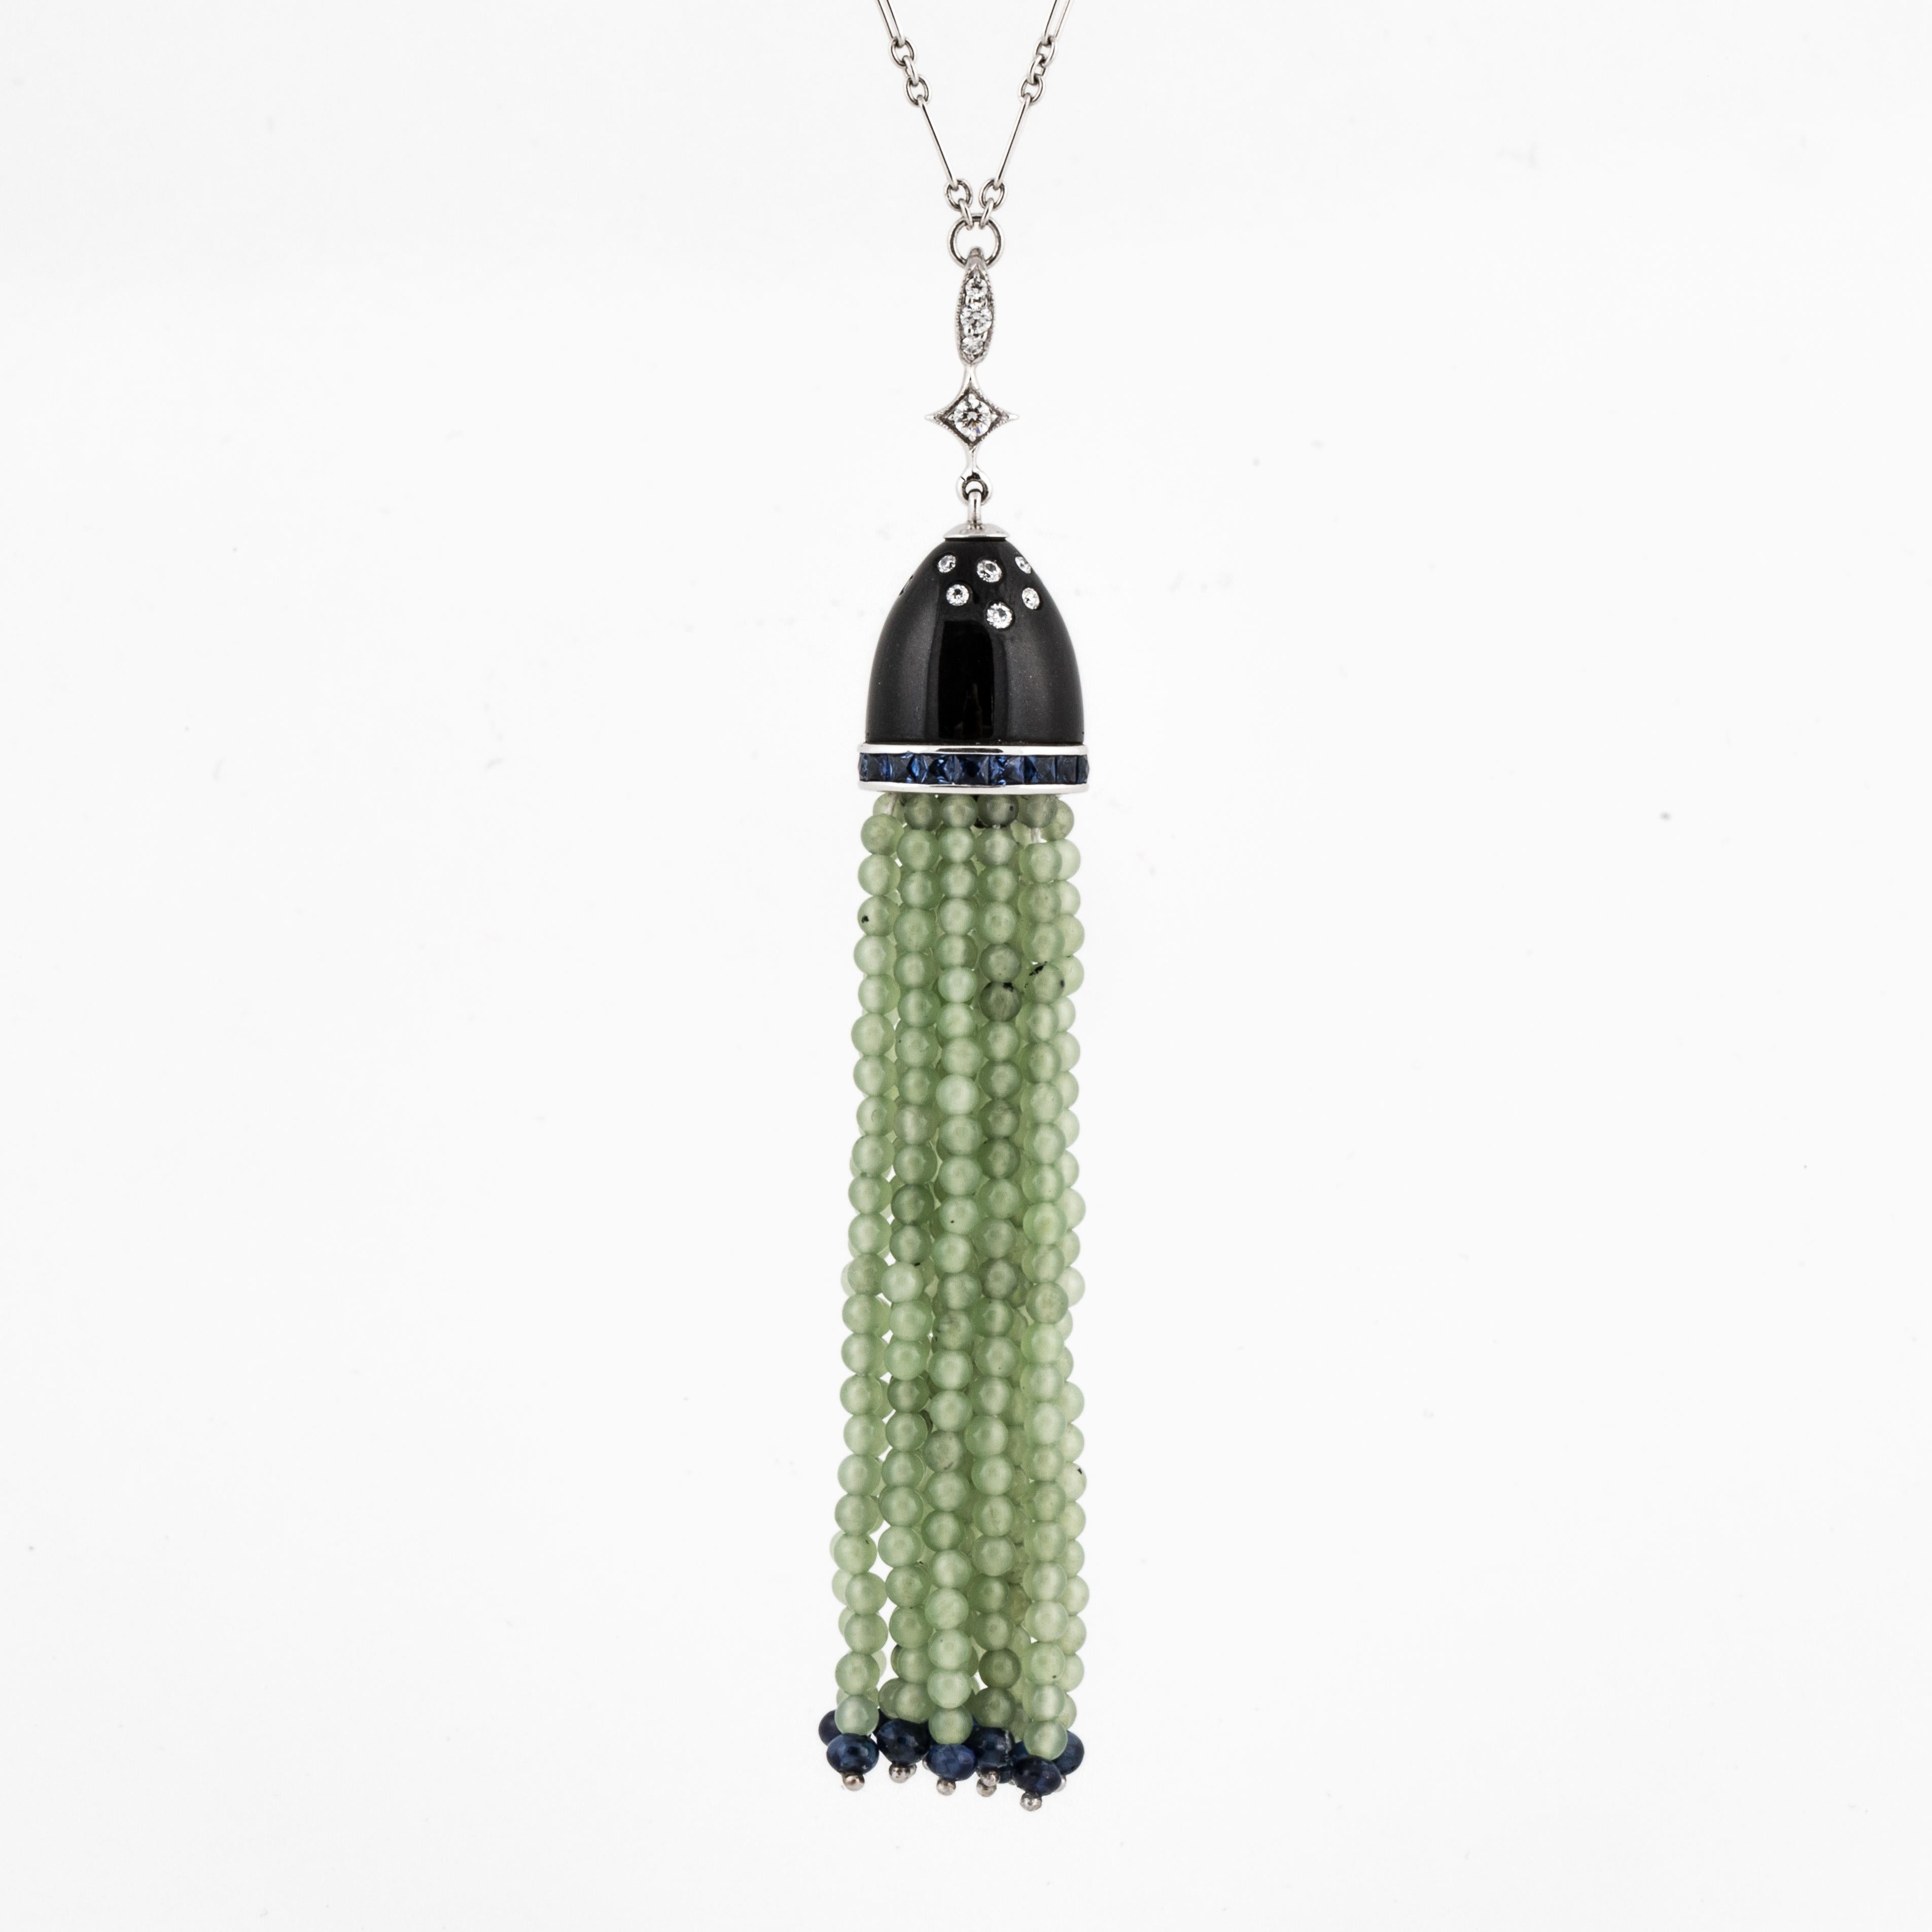 Fred Leighton tassel pendant necklace in 18K white gold composed of diamonds, sapphires, onyx and jade with black enamel.  There are 13 strands of nephrite jade beads, accented with sapphire beads and calibré cut sapphires that total 1.40 carats. 